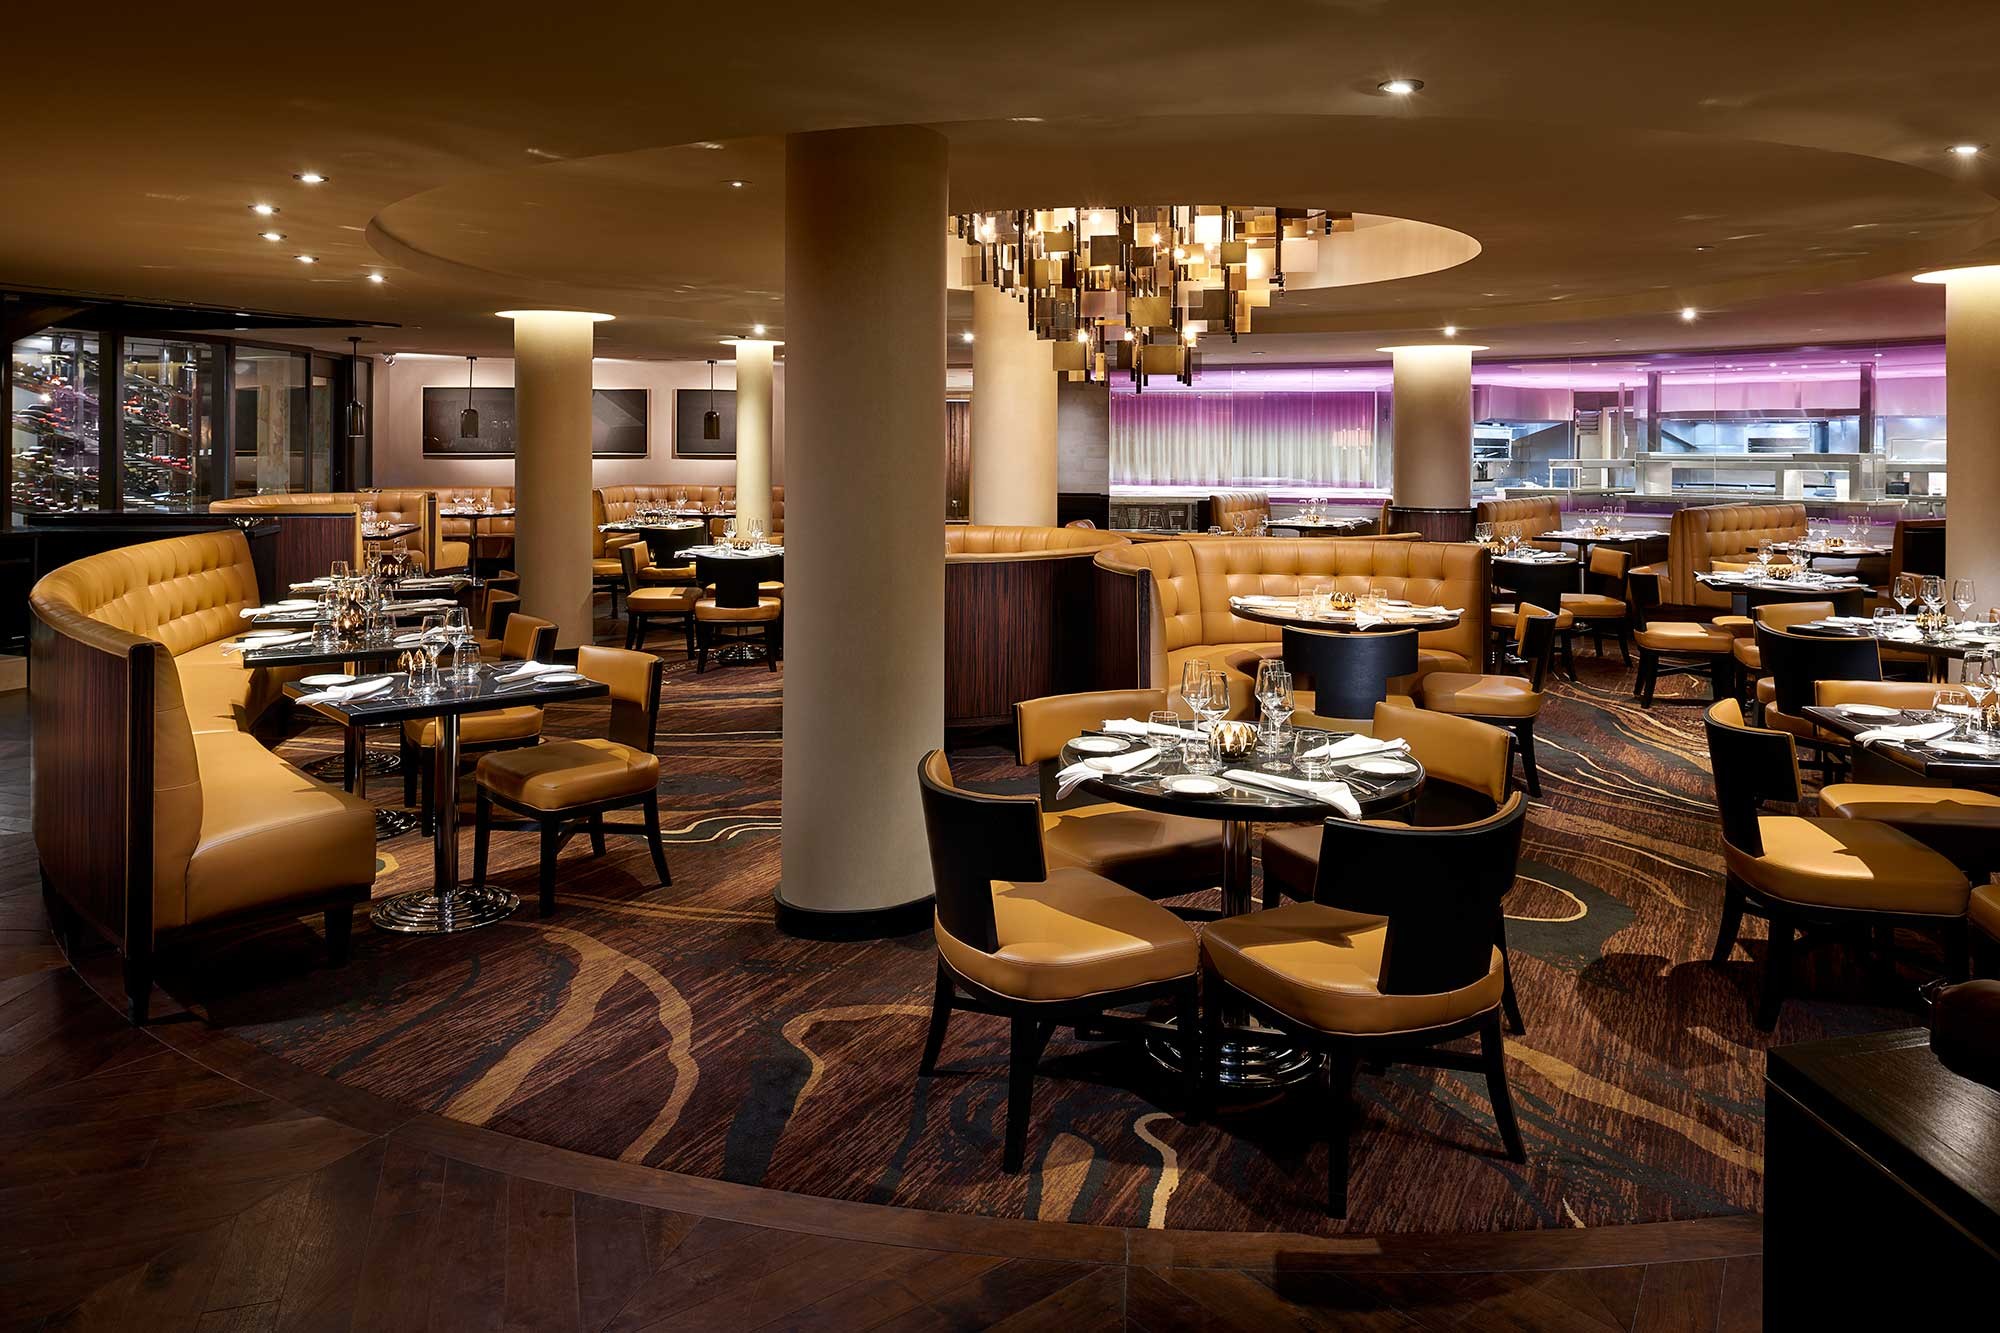 Steakhouse dining area at the Fontainebleau Miami Beach.